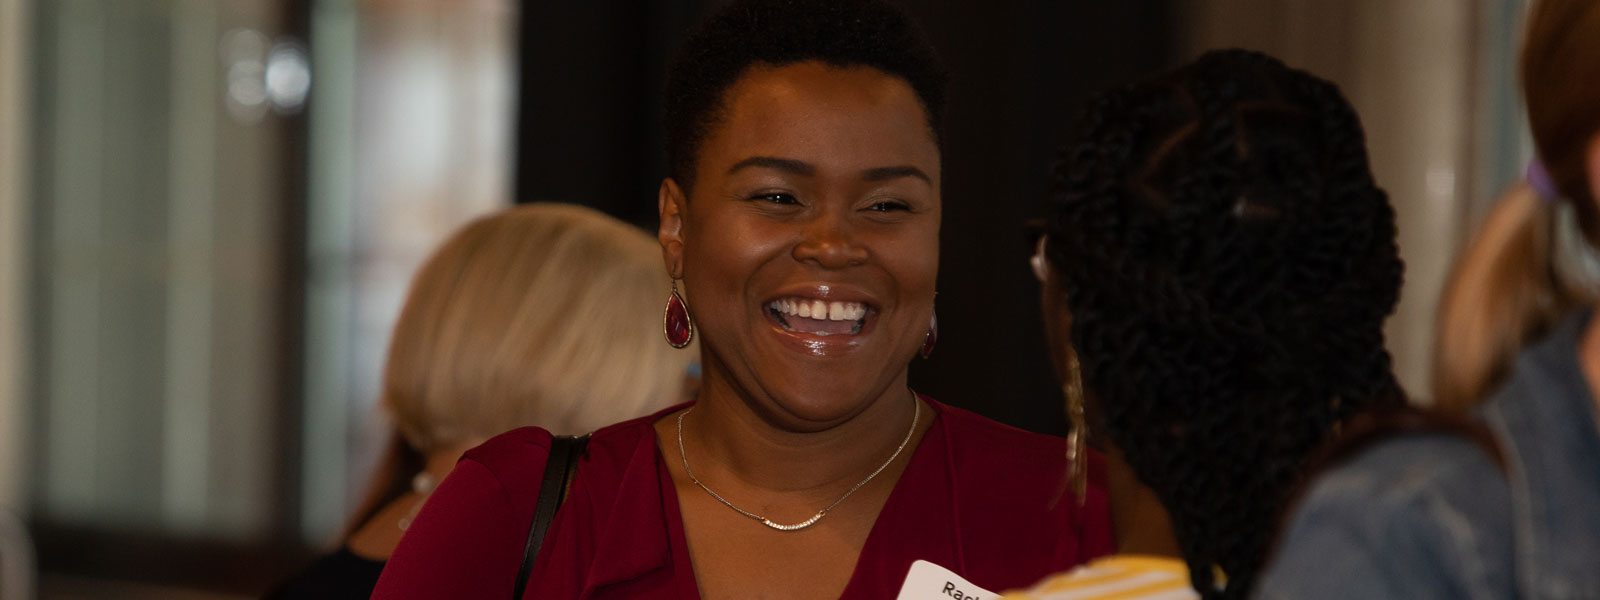 woman networking at a donor network event